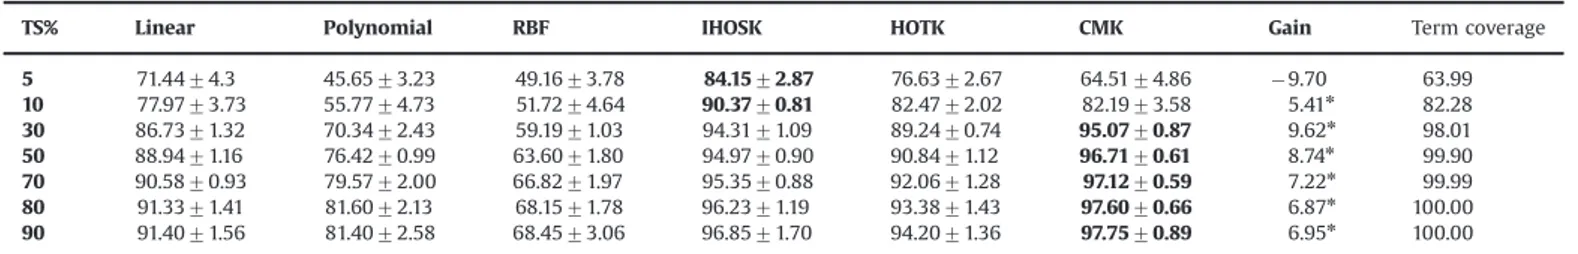 Fig. 6 . The CMK has much better performance than both UMK and TF-ICF in almost all training set percentages except 10%